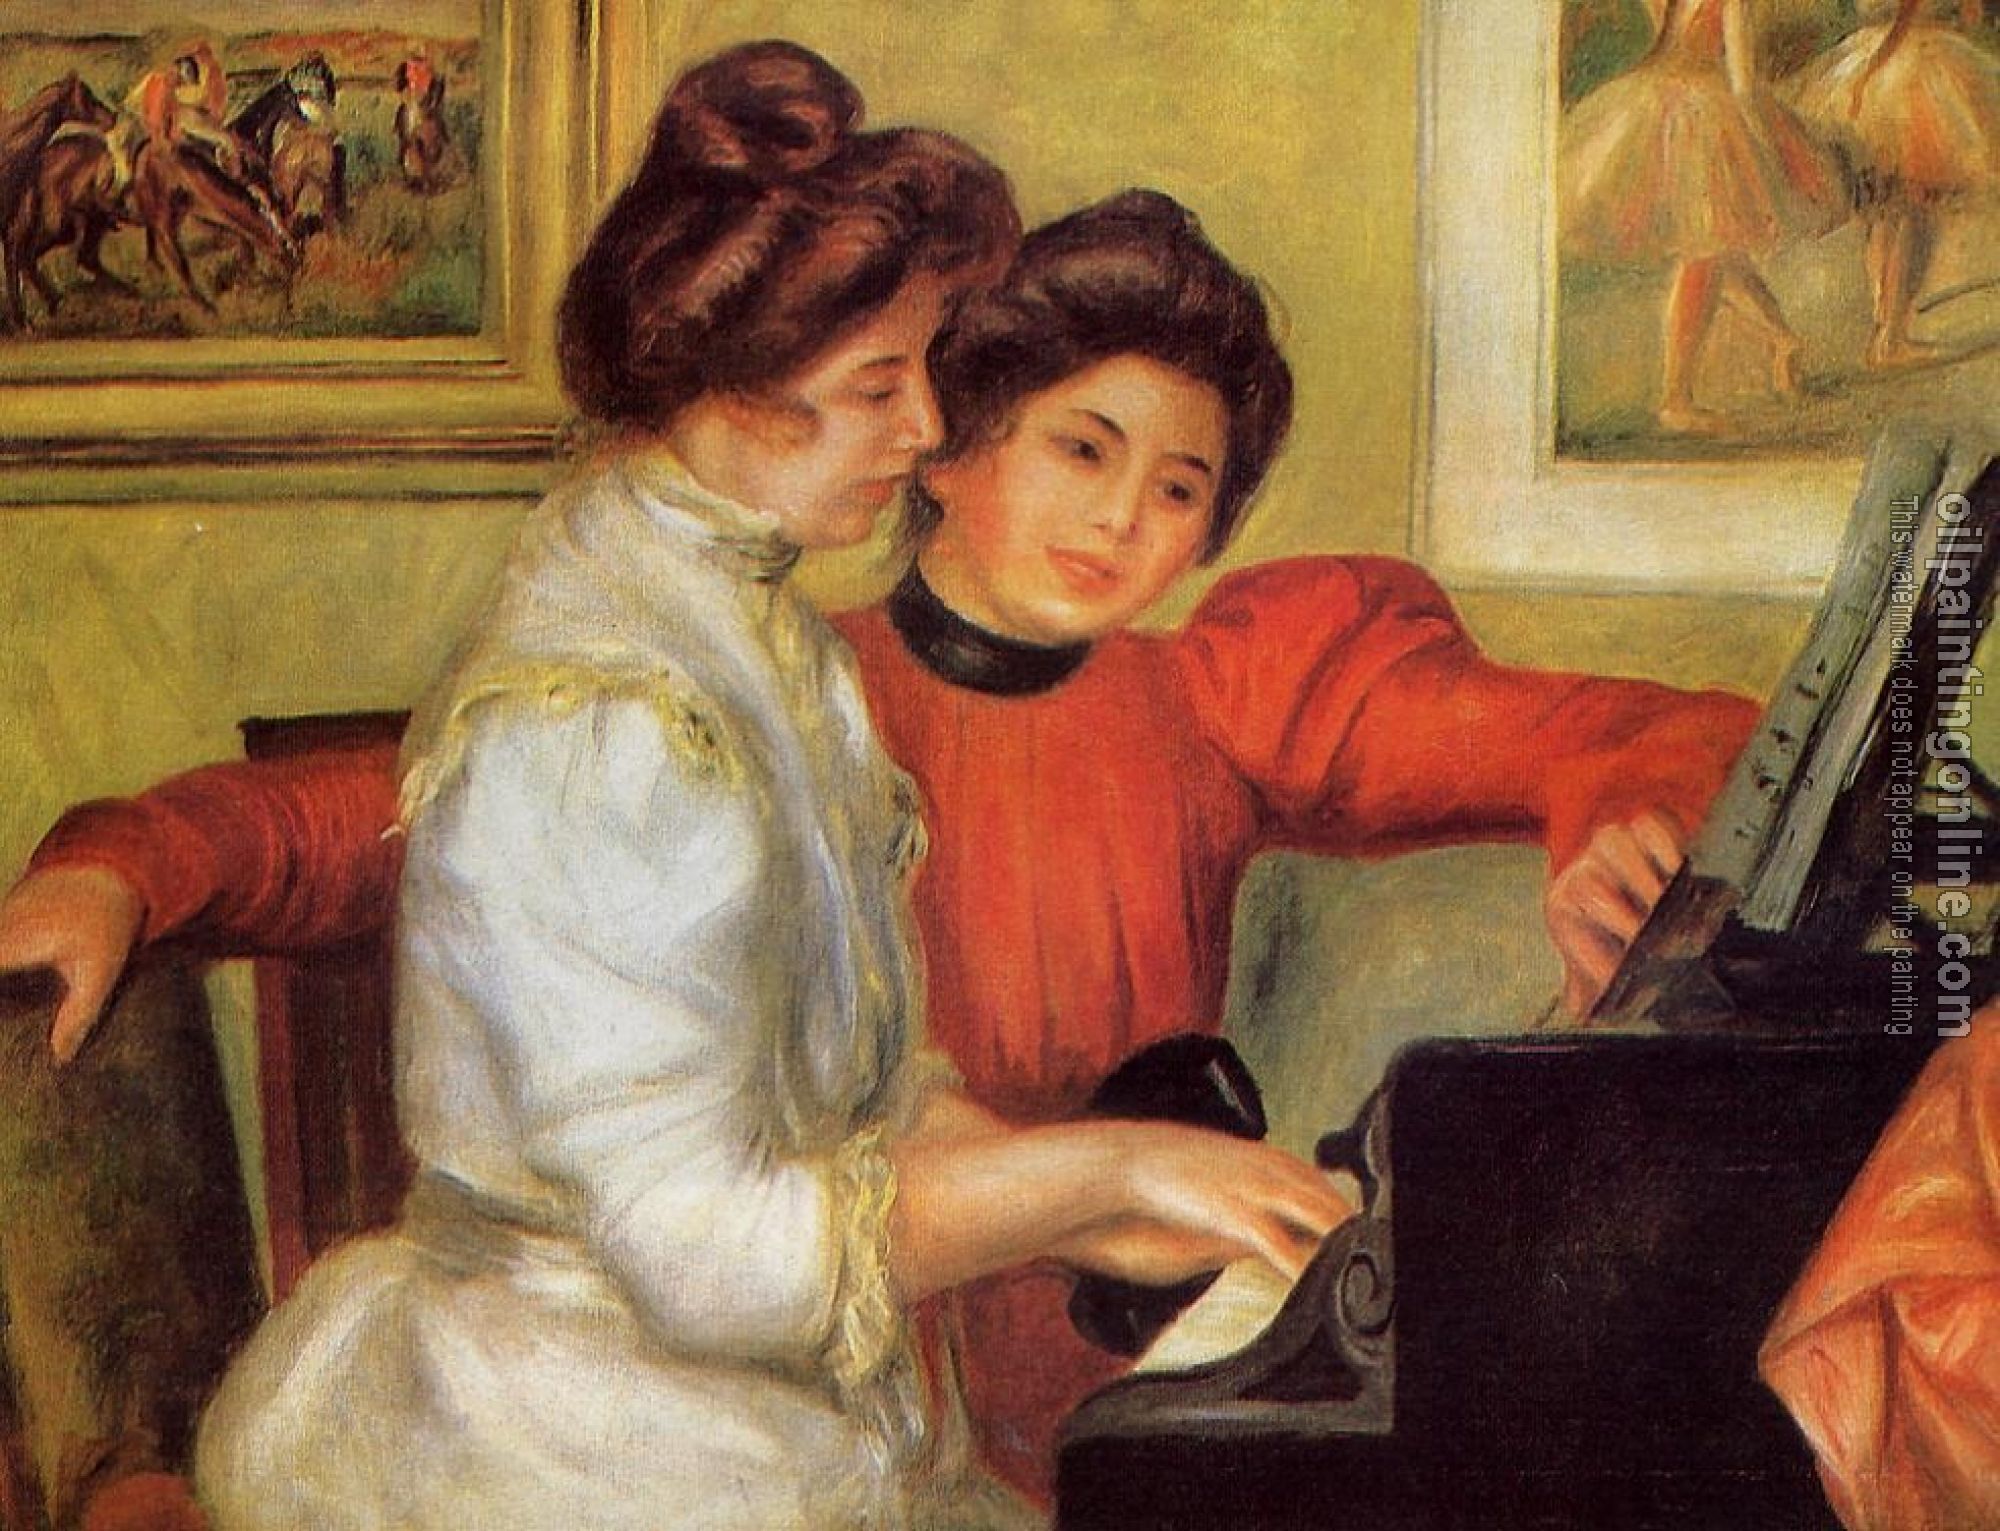 Renoir, Pierre Auguste - Yvonne and Christine Lerolle at the Piano